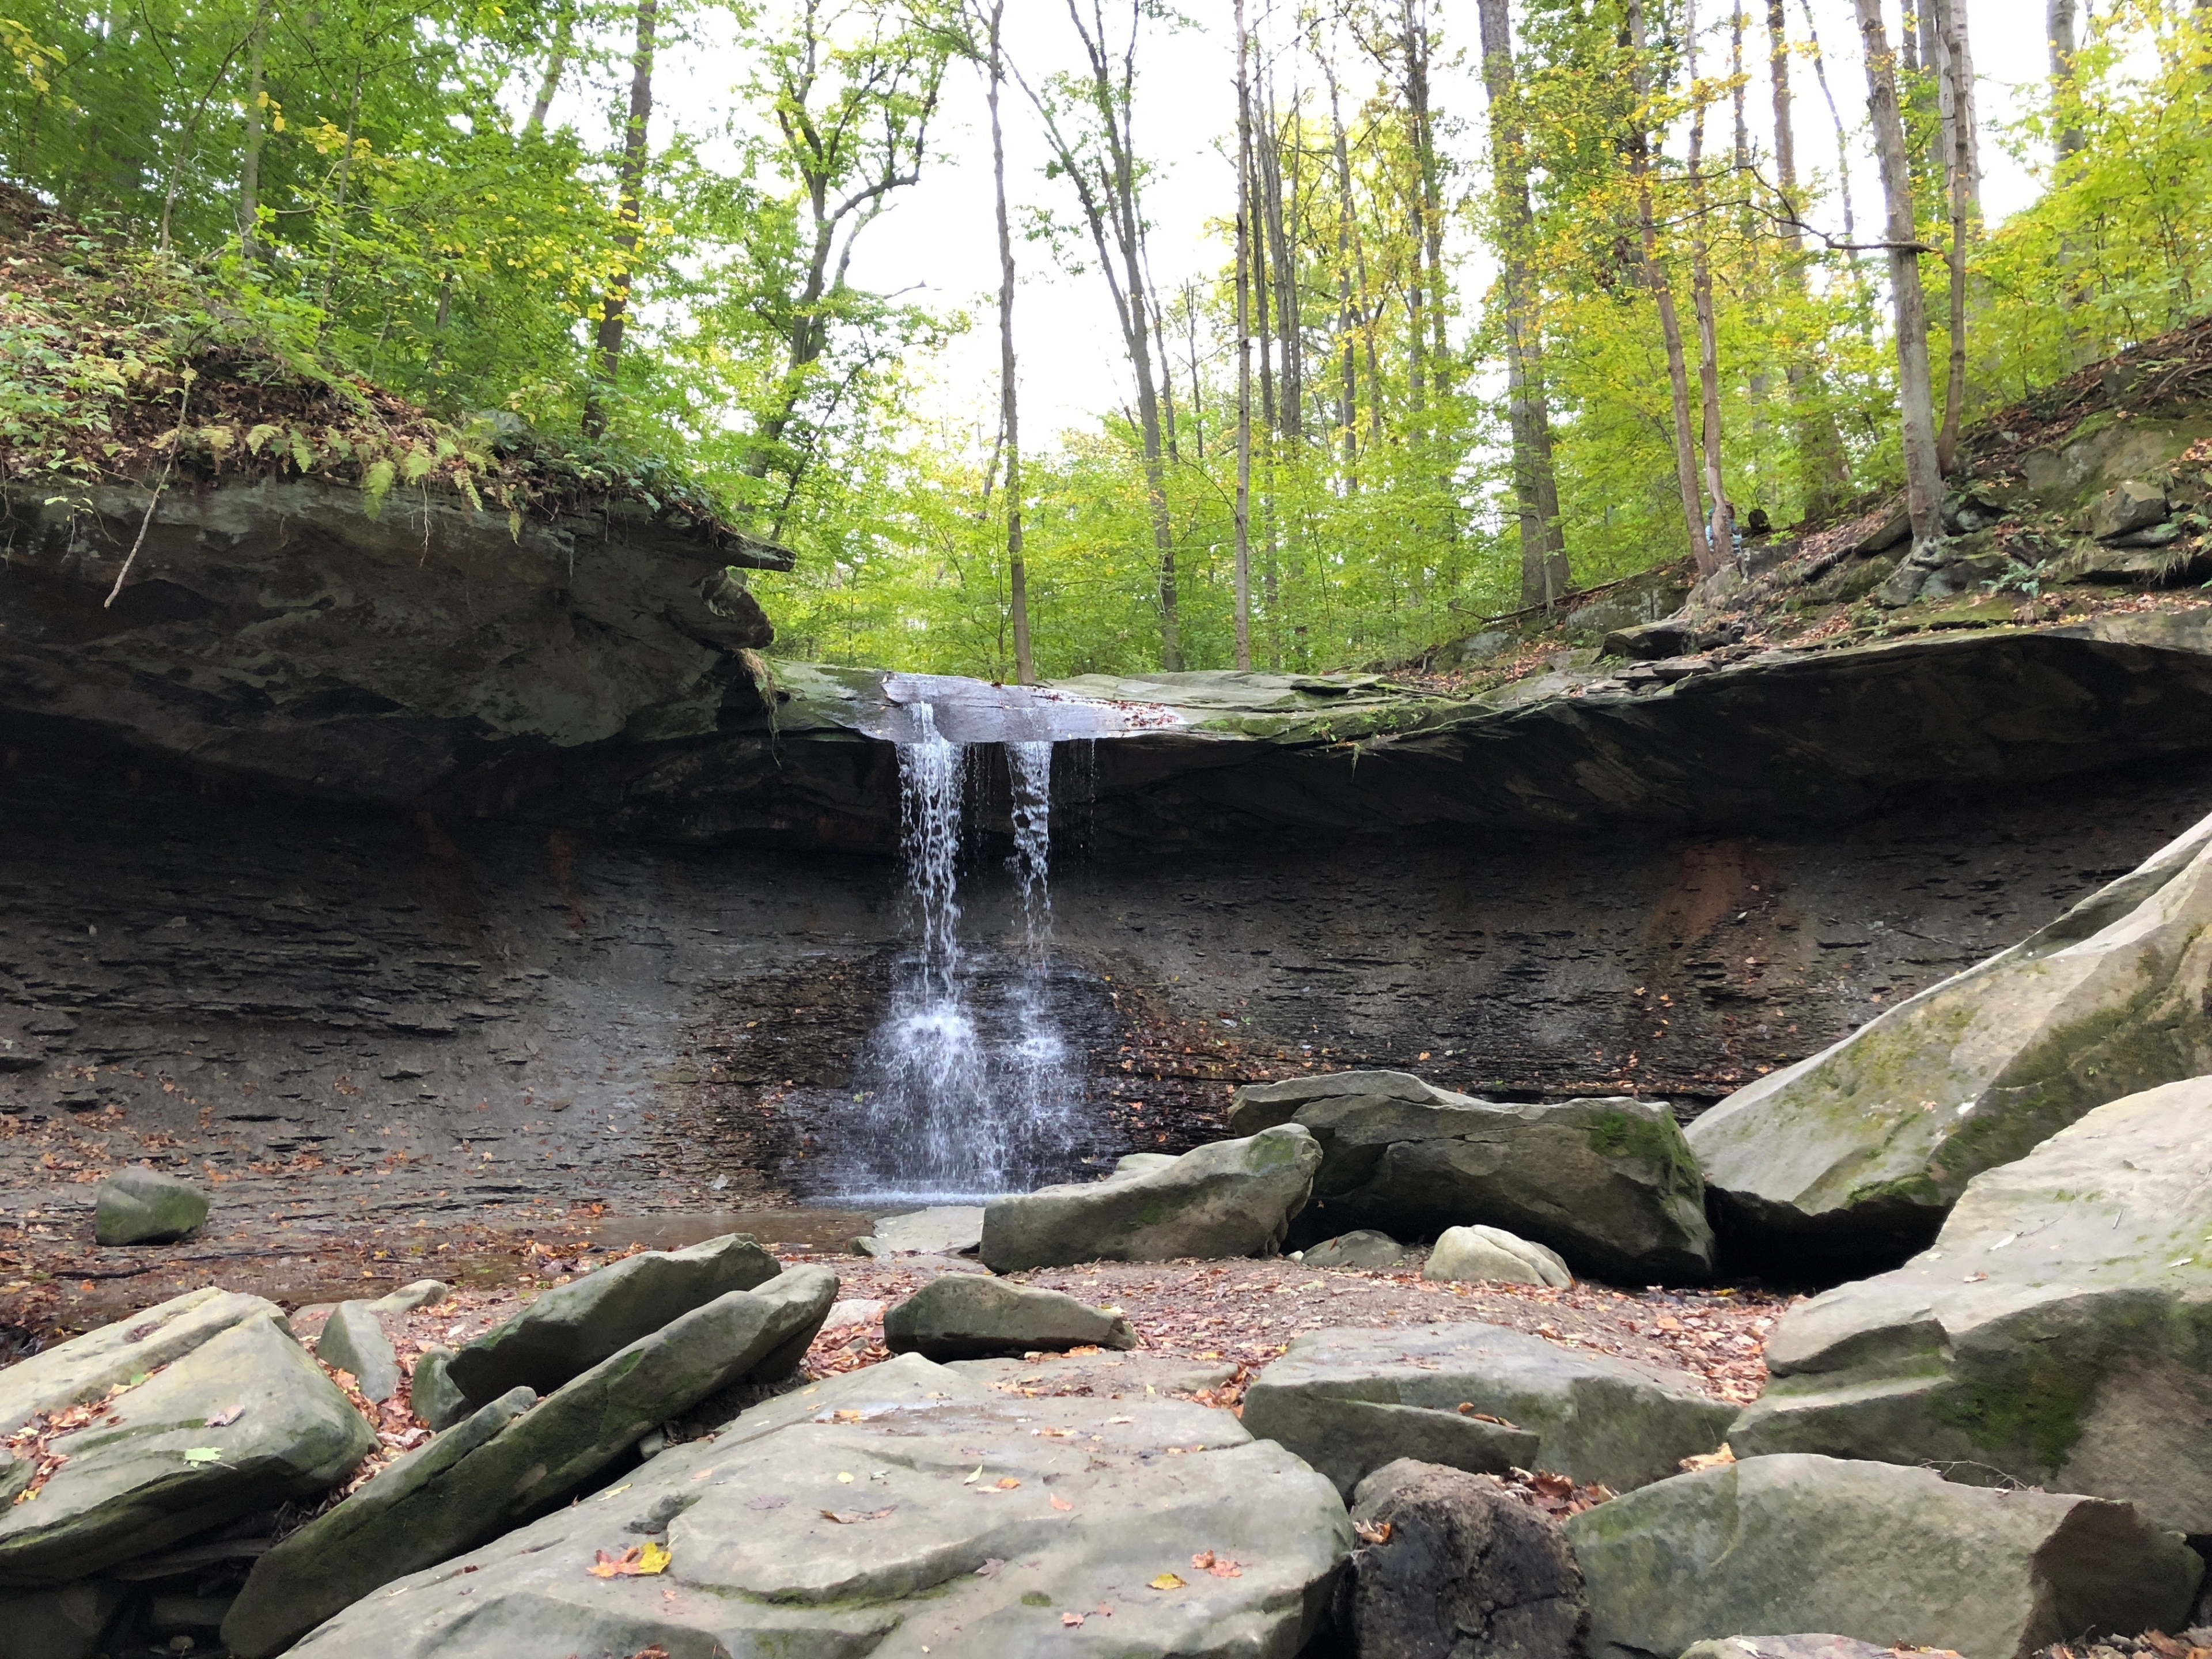 1/6 mile hike to get to Blue Hen Falls. If you go by the visitor center, it's only about a mile away from there.